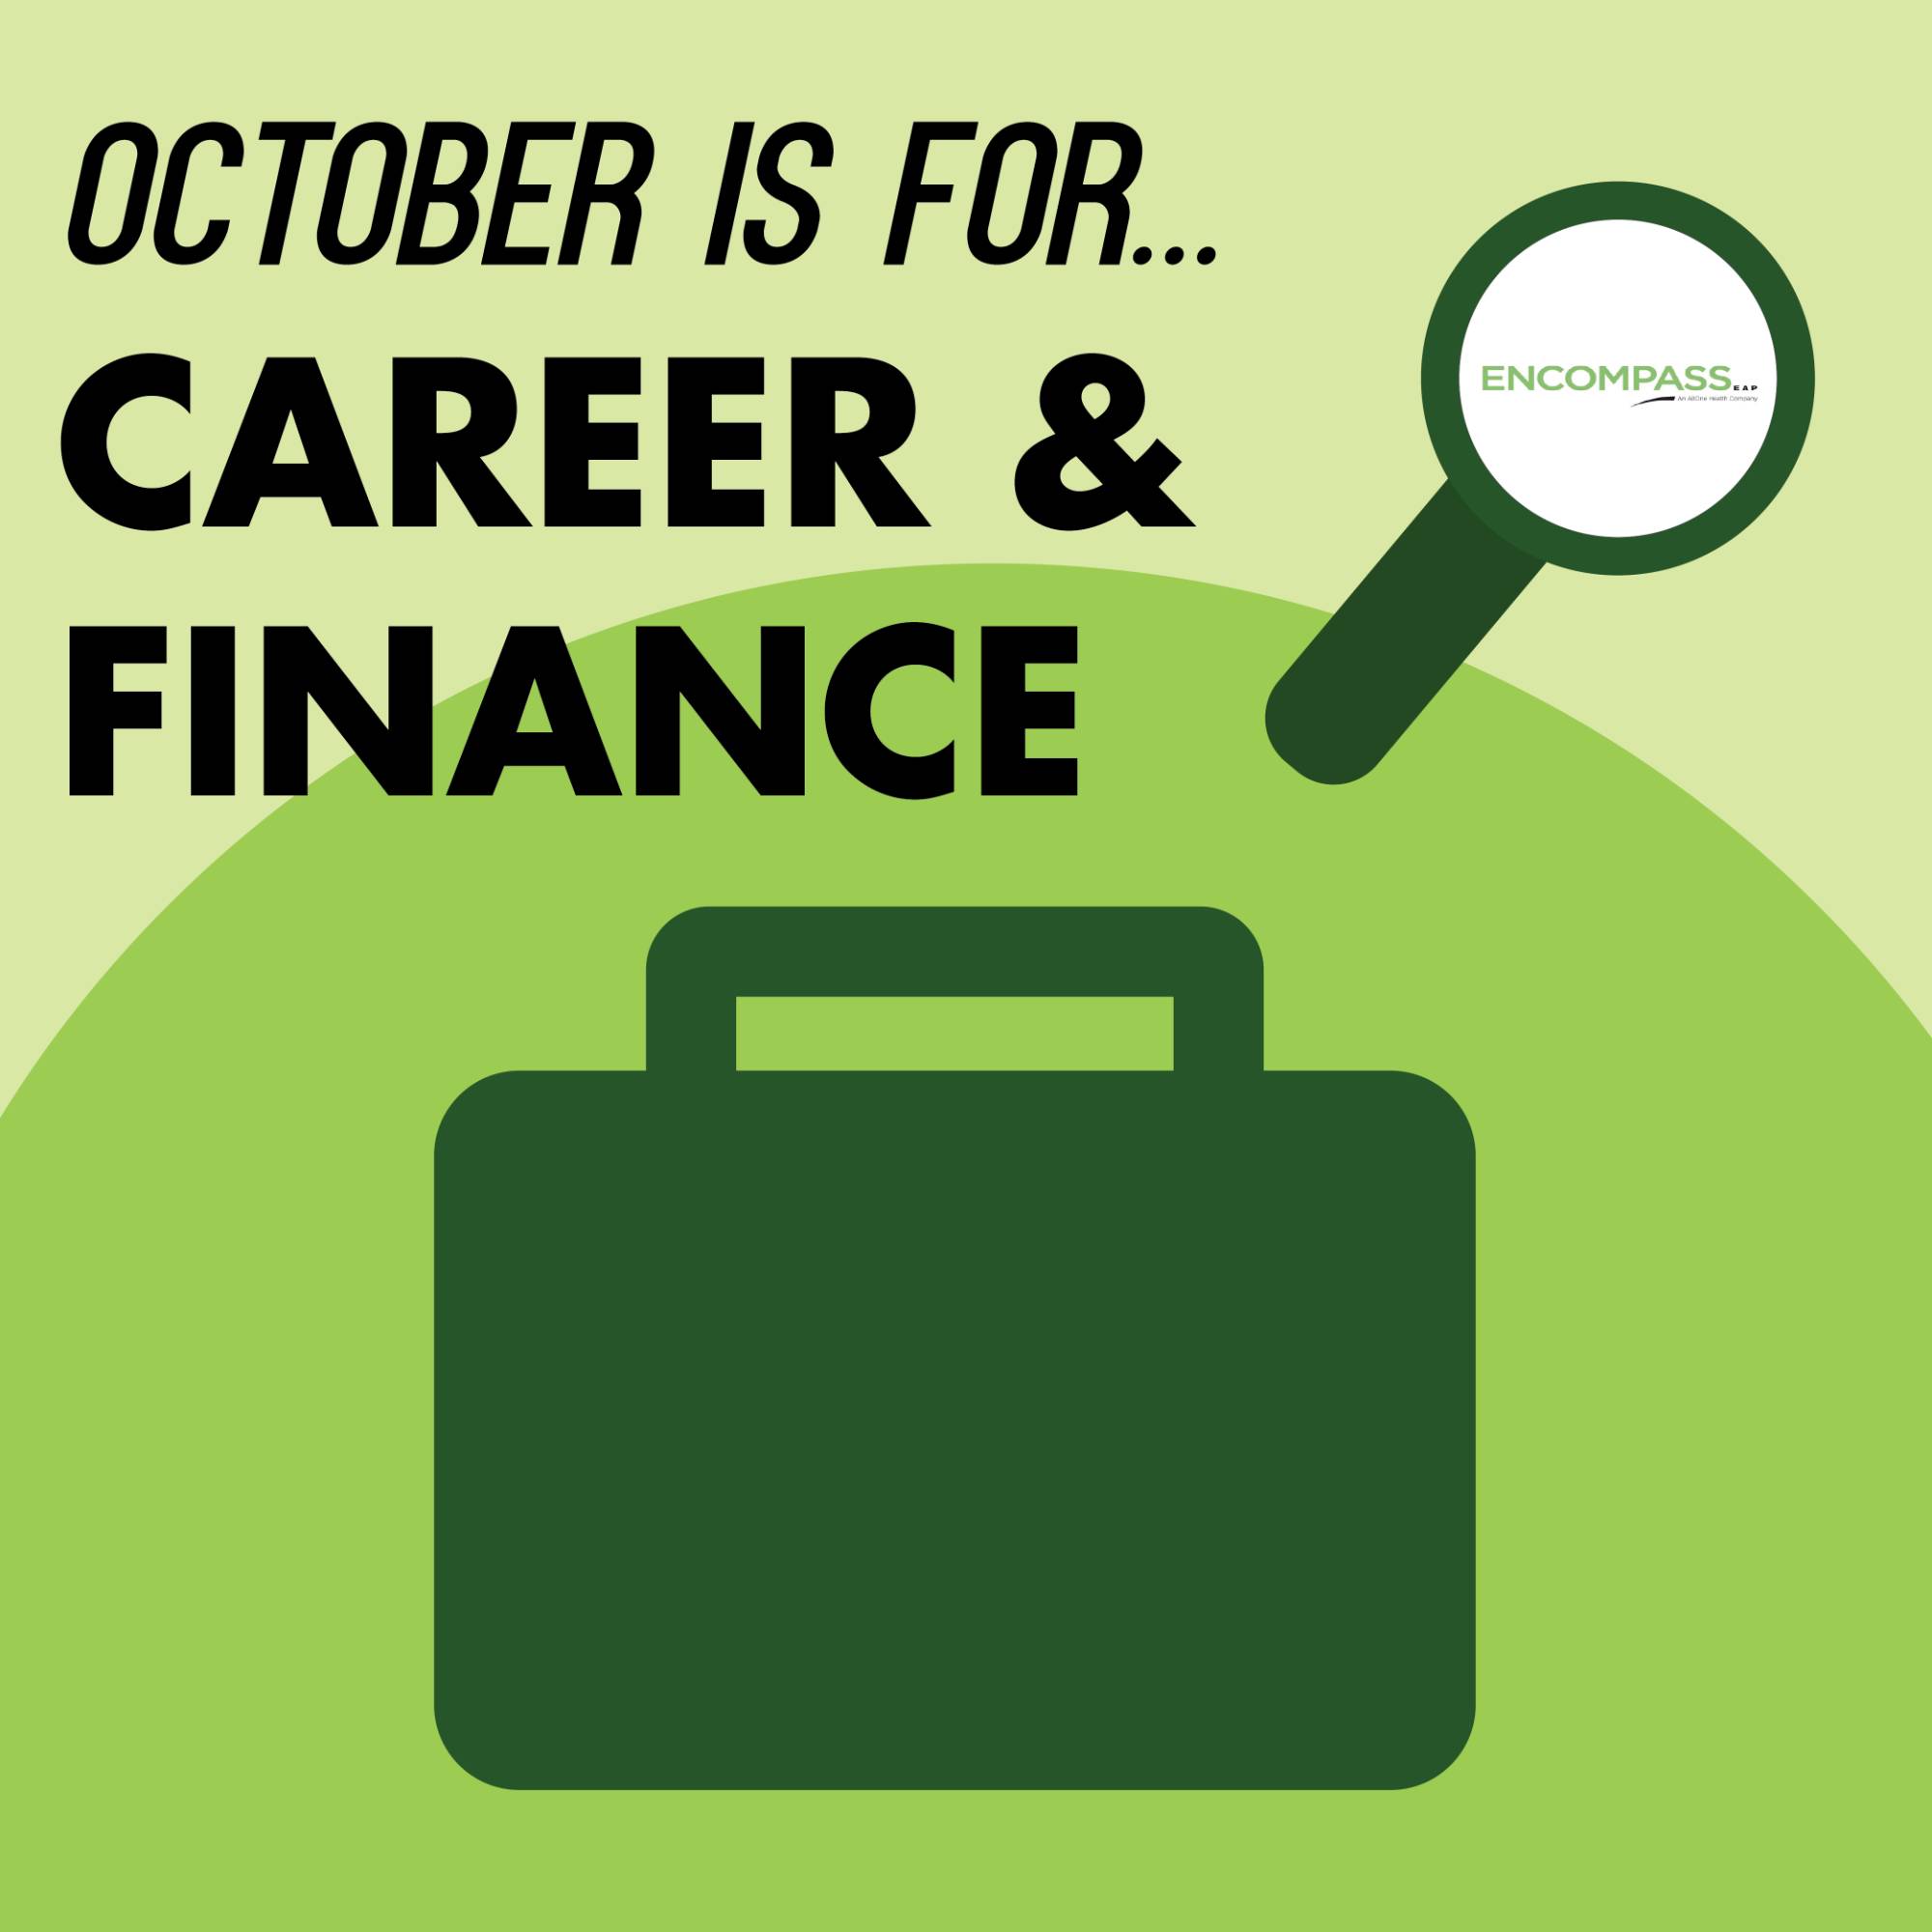 October is for Career and Finance